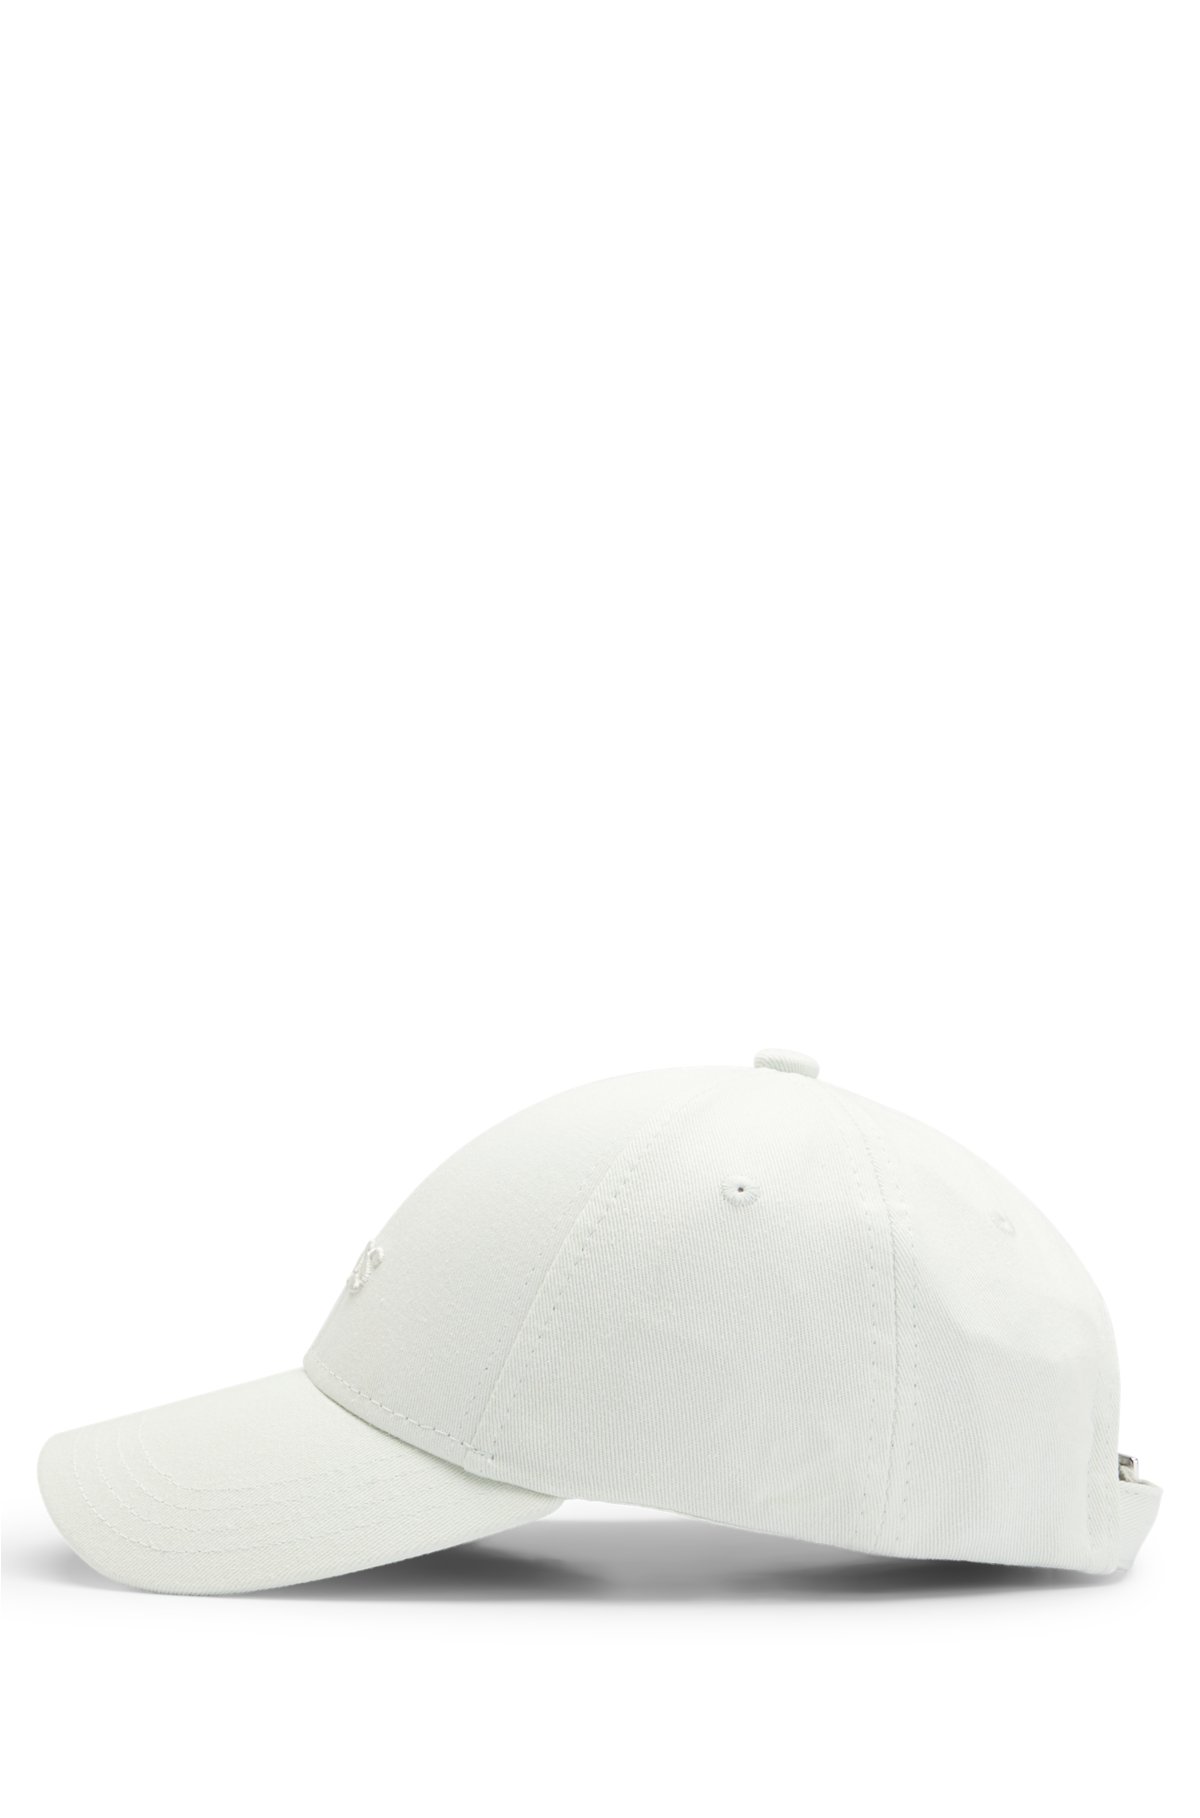 Cotton-twill cap with embroidered logo, Light Green